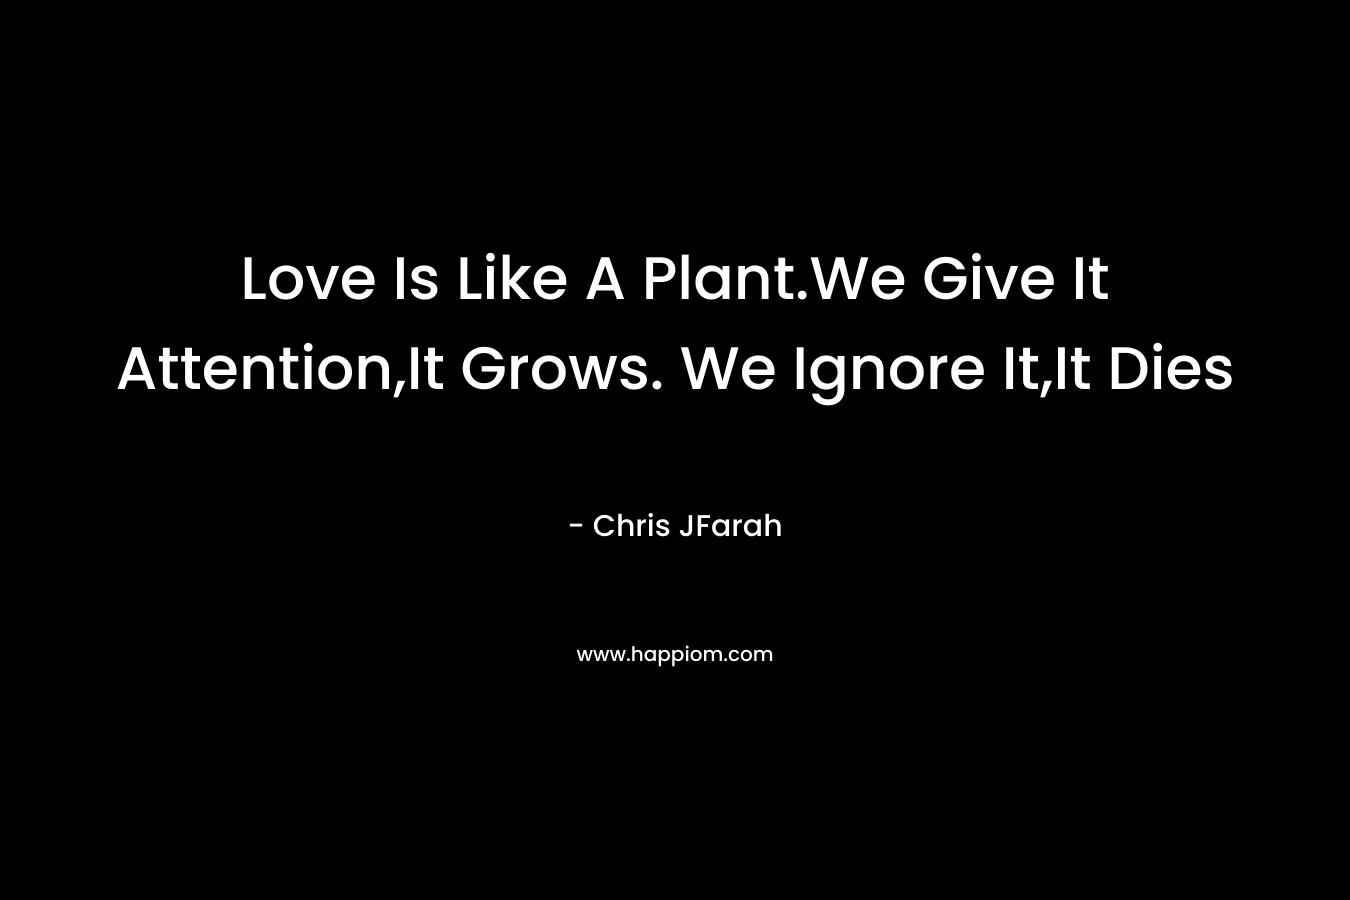 Love Is Like A Plant.We Give It Attention,It Grows. We Ignore It,It Dies